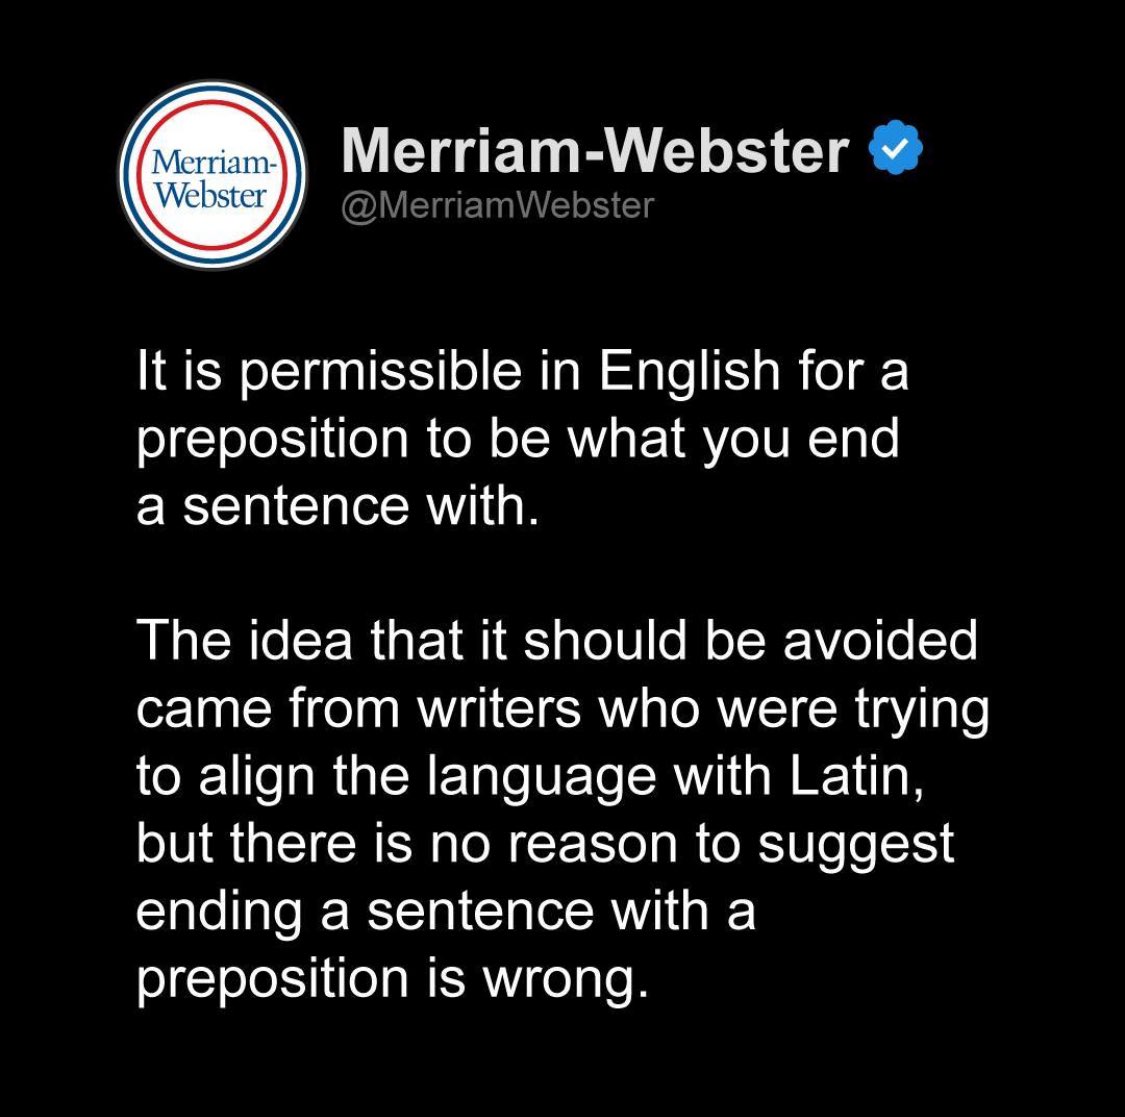 Merriam-Webster posted this little nugget on Instagram last week. The replies are plentiful. Old news for some, breaking news for others. Of course, you have tight-asses who refuse to let go of what they were taught. But most folks seem to agree, which I find encouraging.